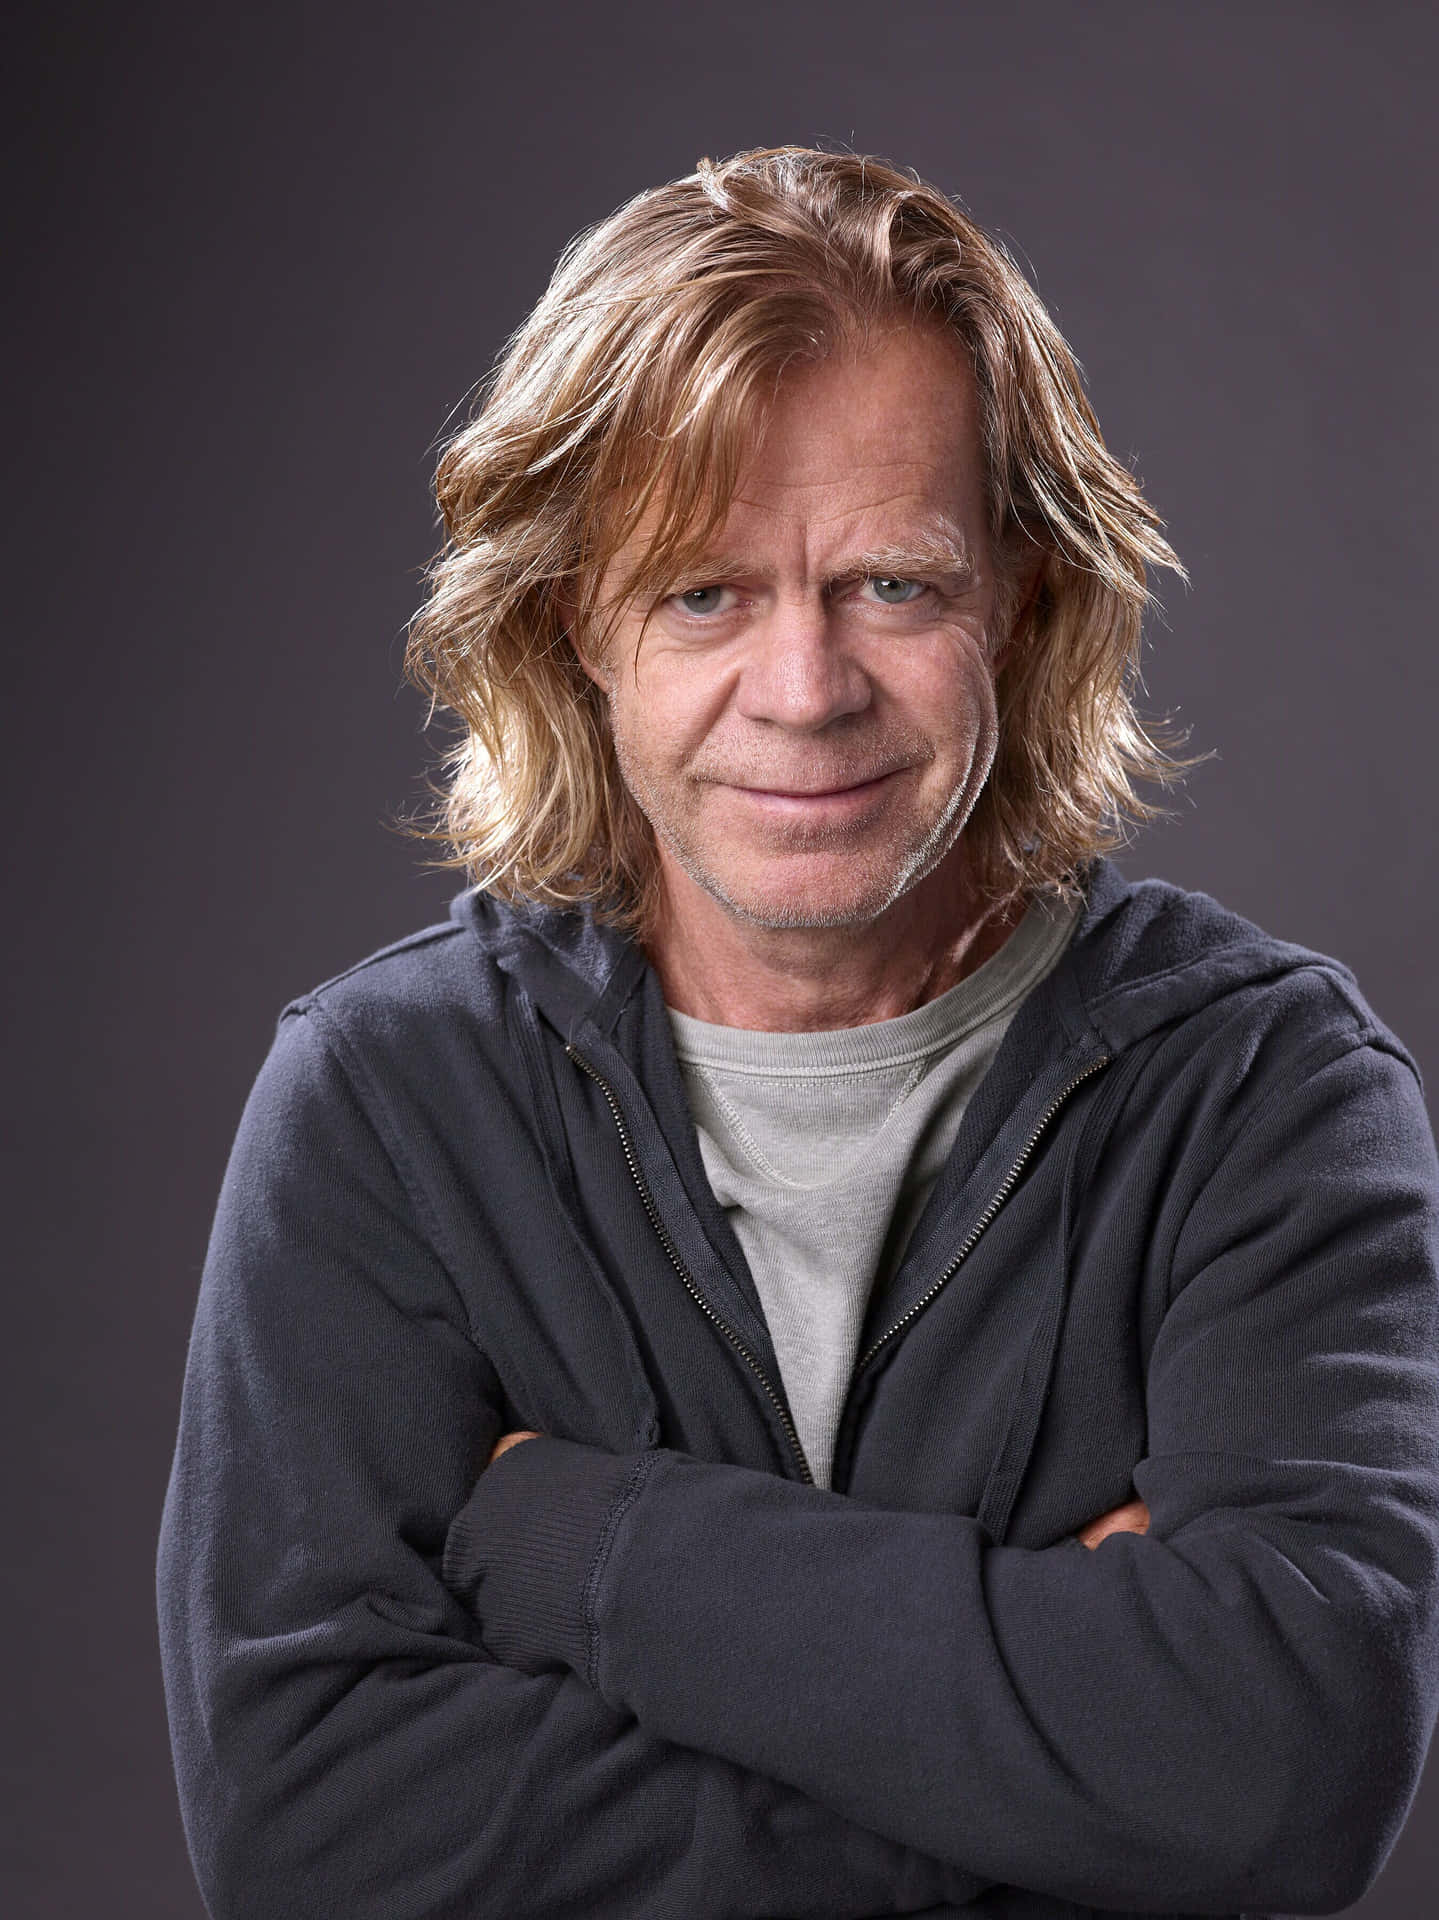 William H. Macy posing for a professional photoshoot Wallpaper